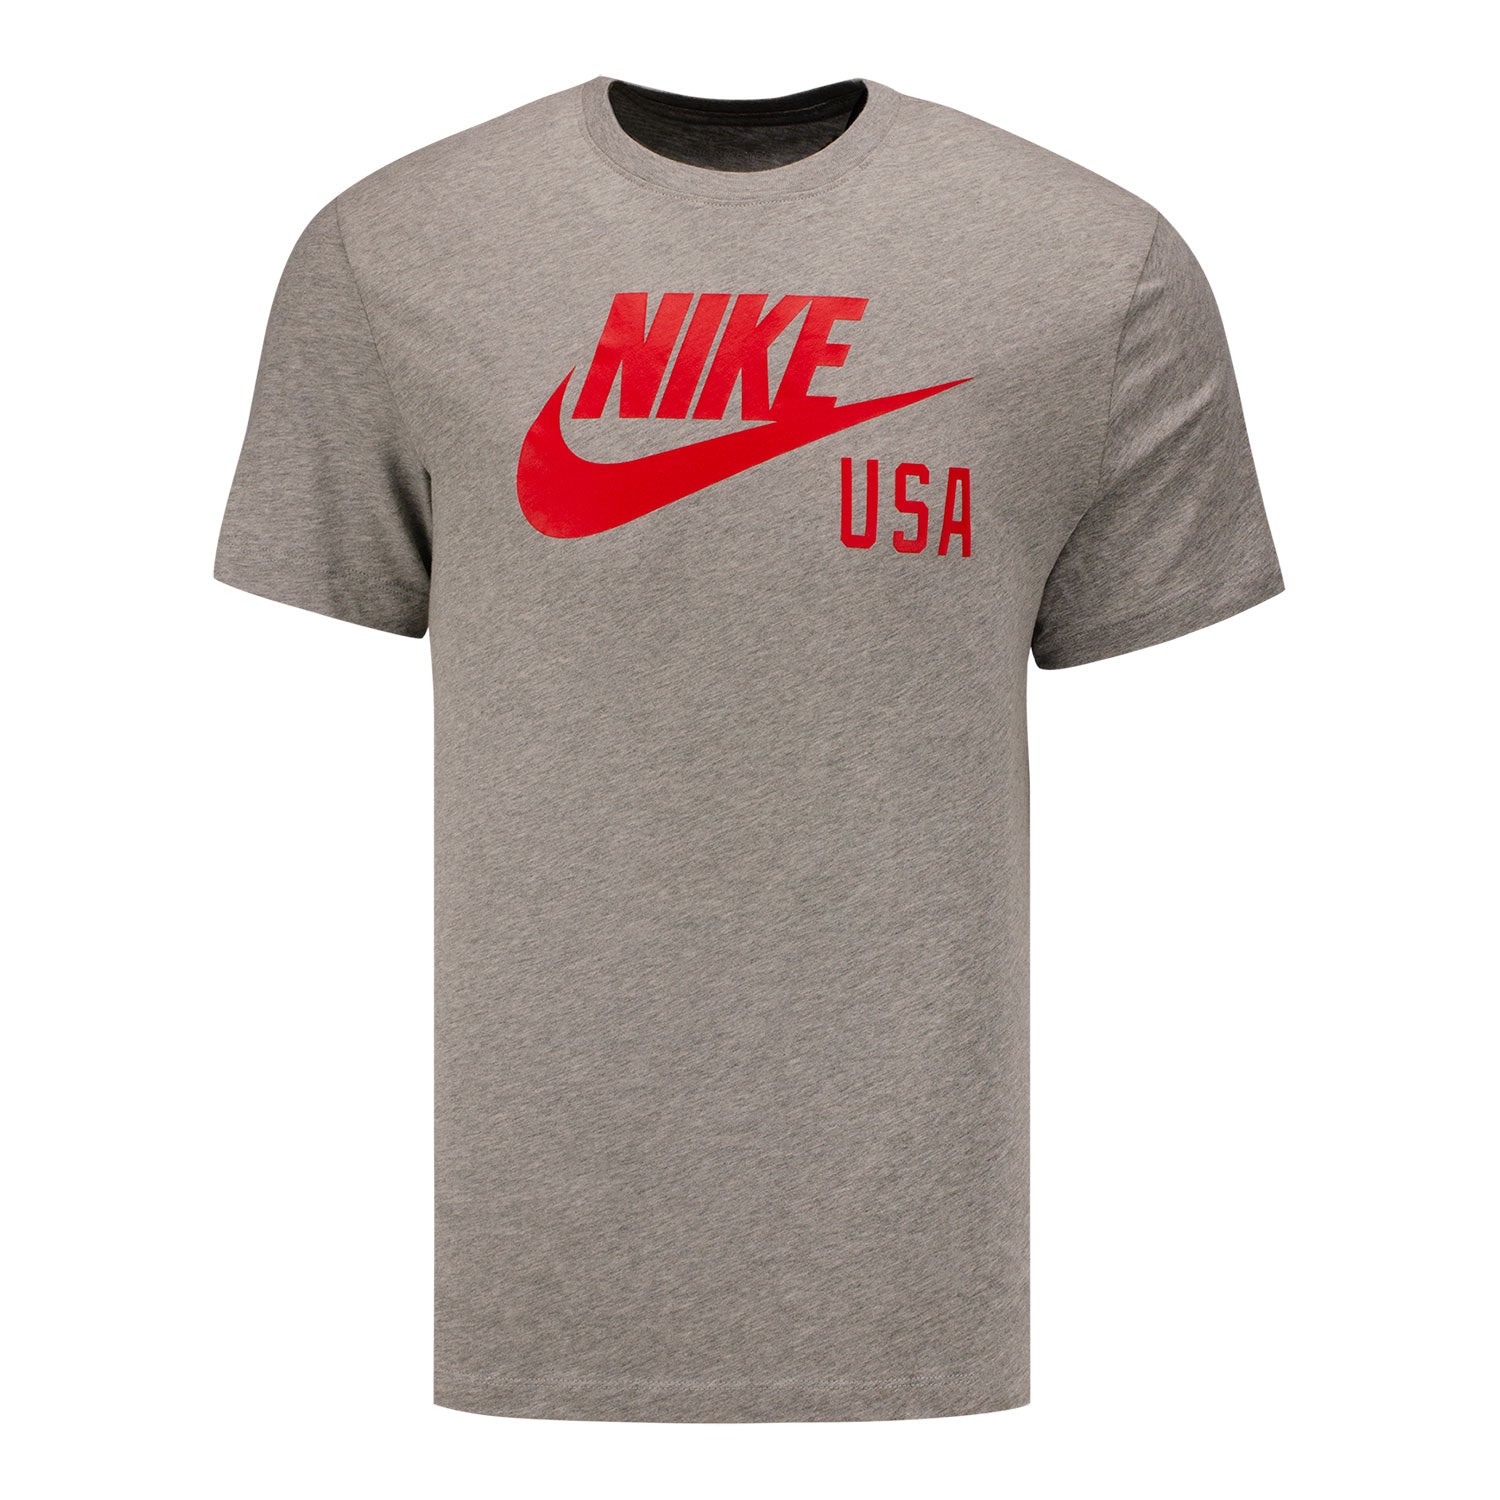 Men's Nike USA Swoosh Grey Ground Tee - Official Soccer Store